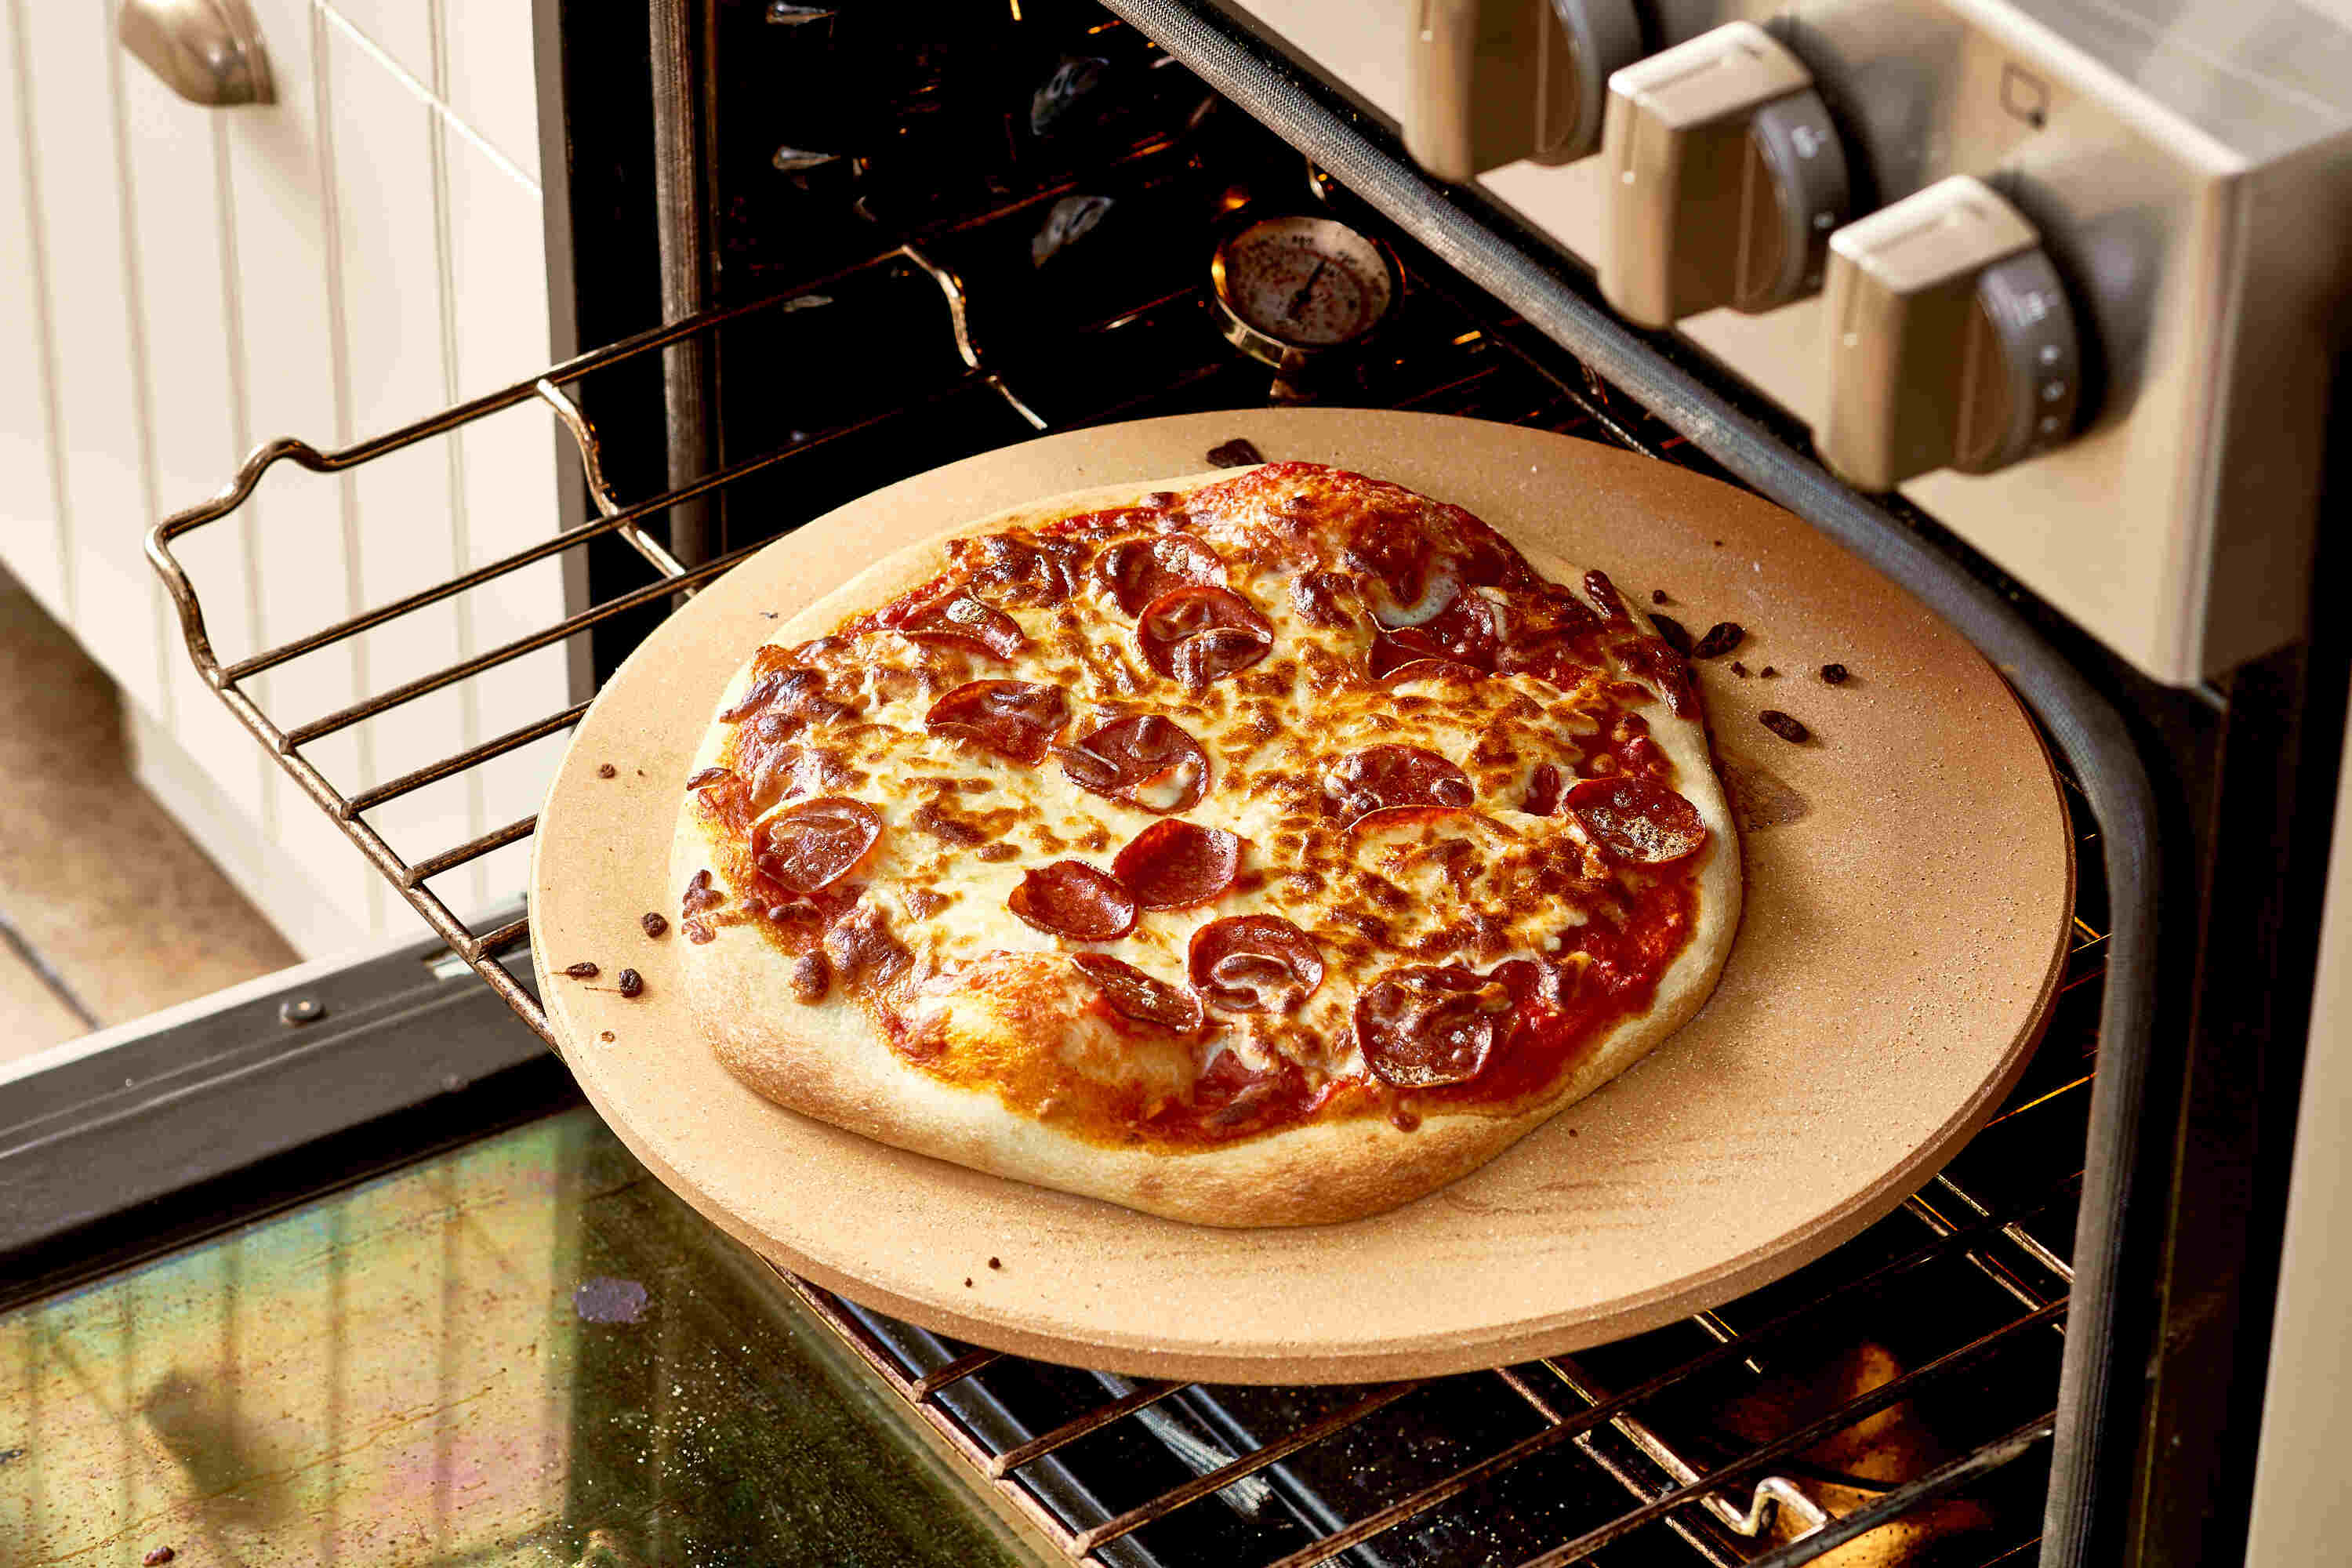 How To Clean A Pizza Stone To Remove Stuck-On Food And Stains